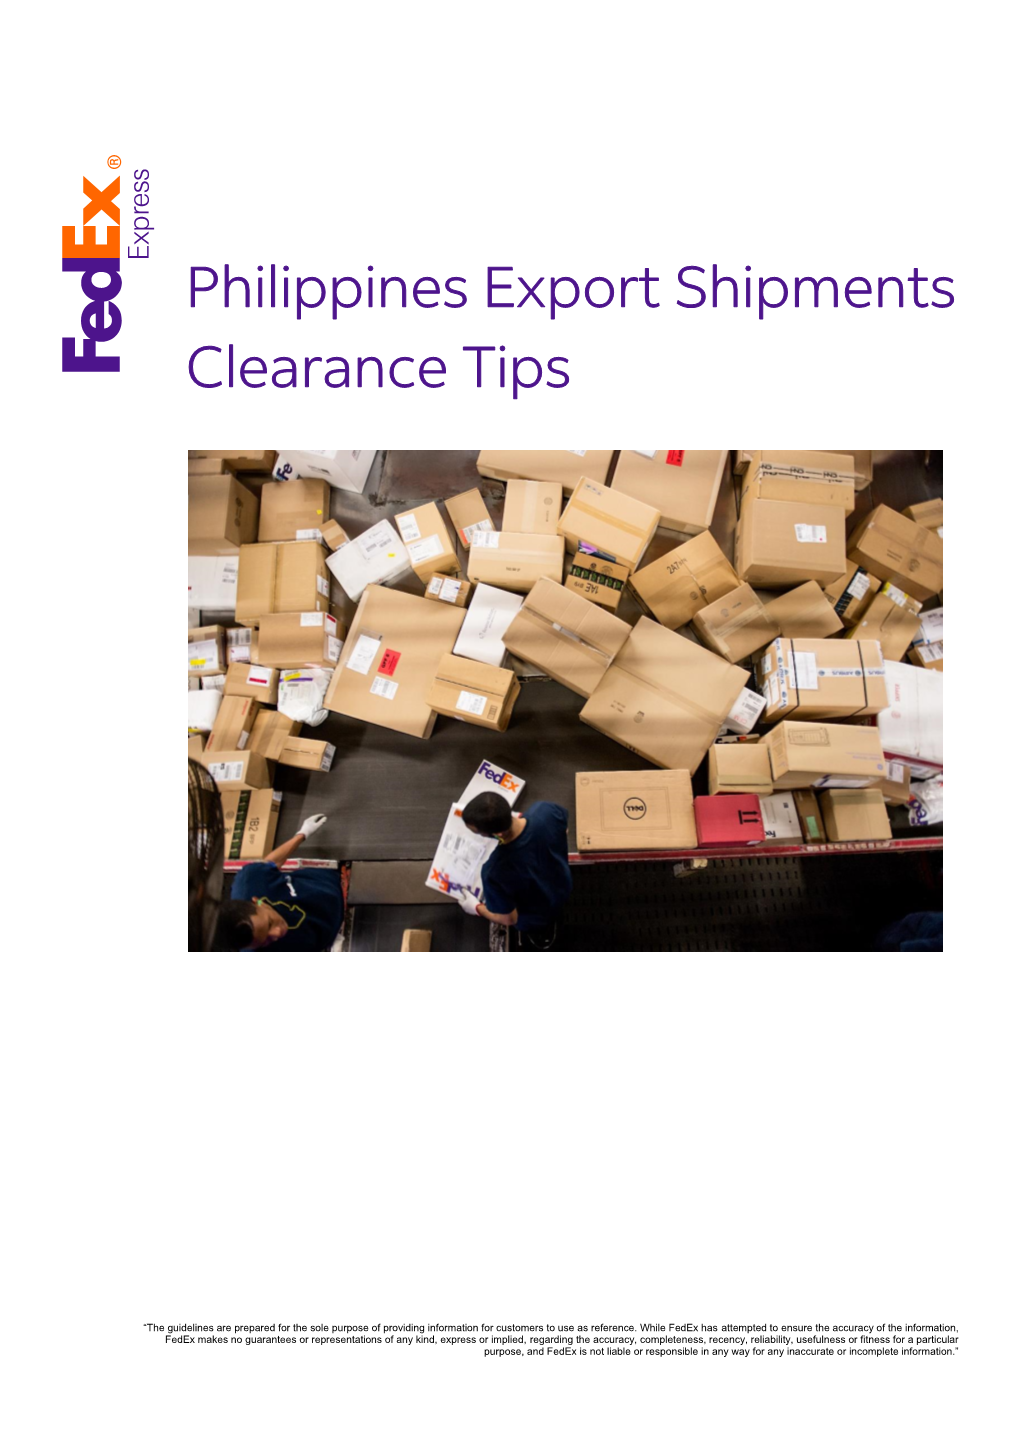 Philippines Export Shipments Clearance Tips